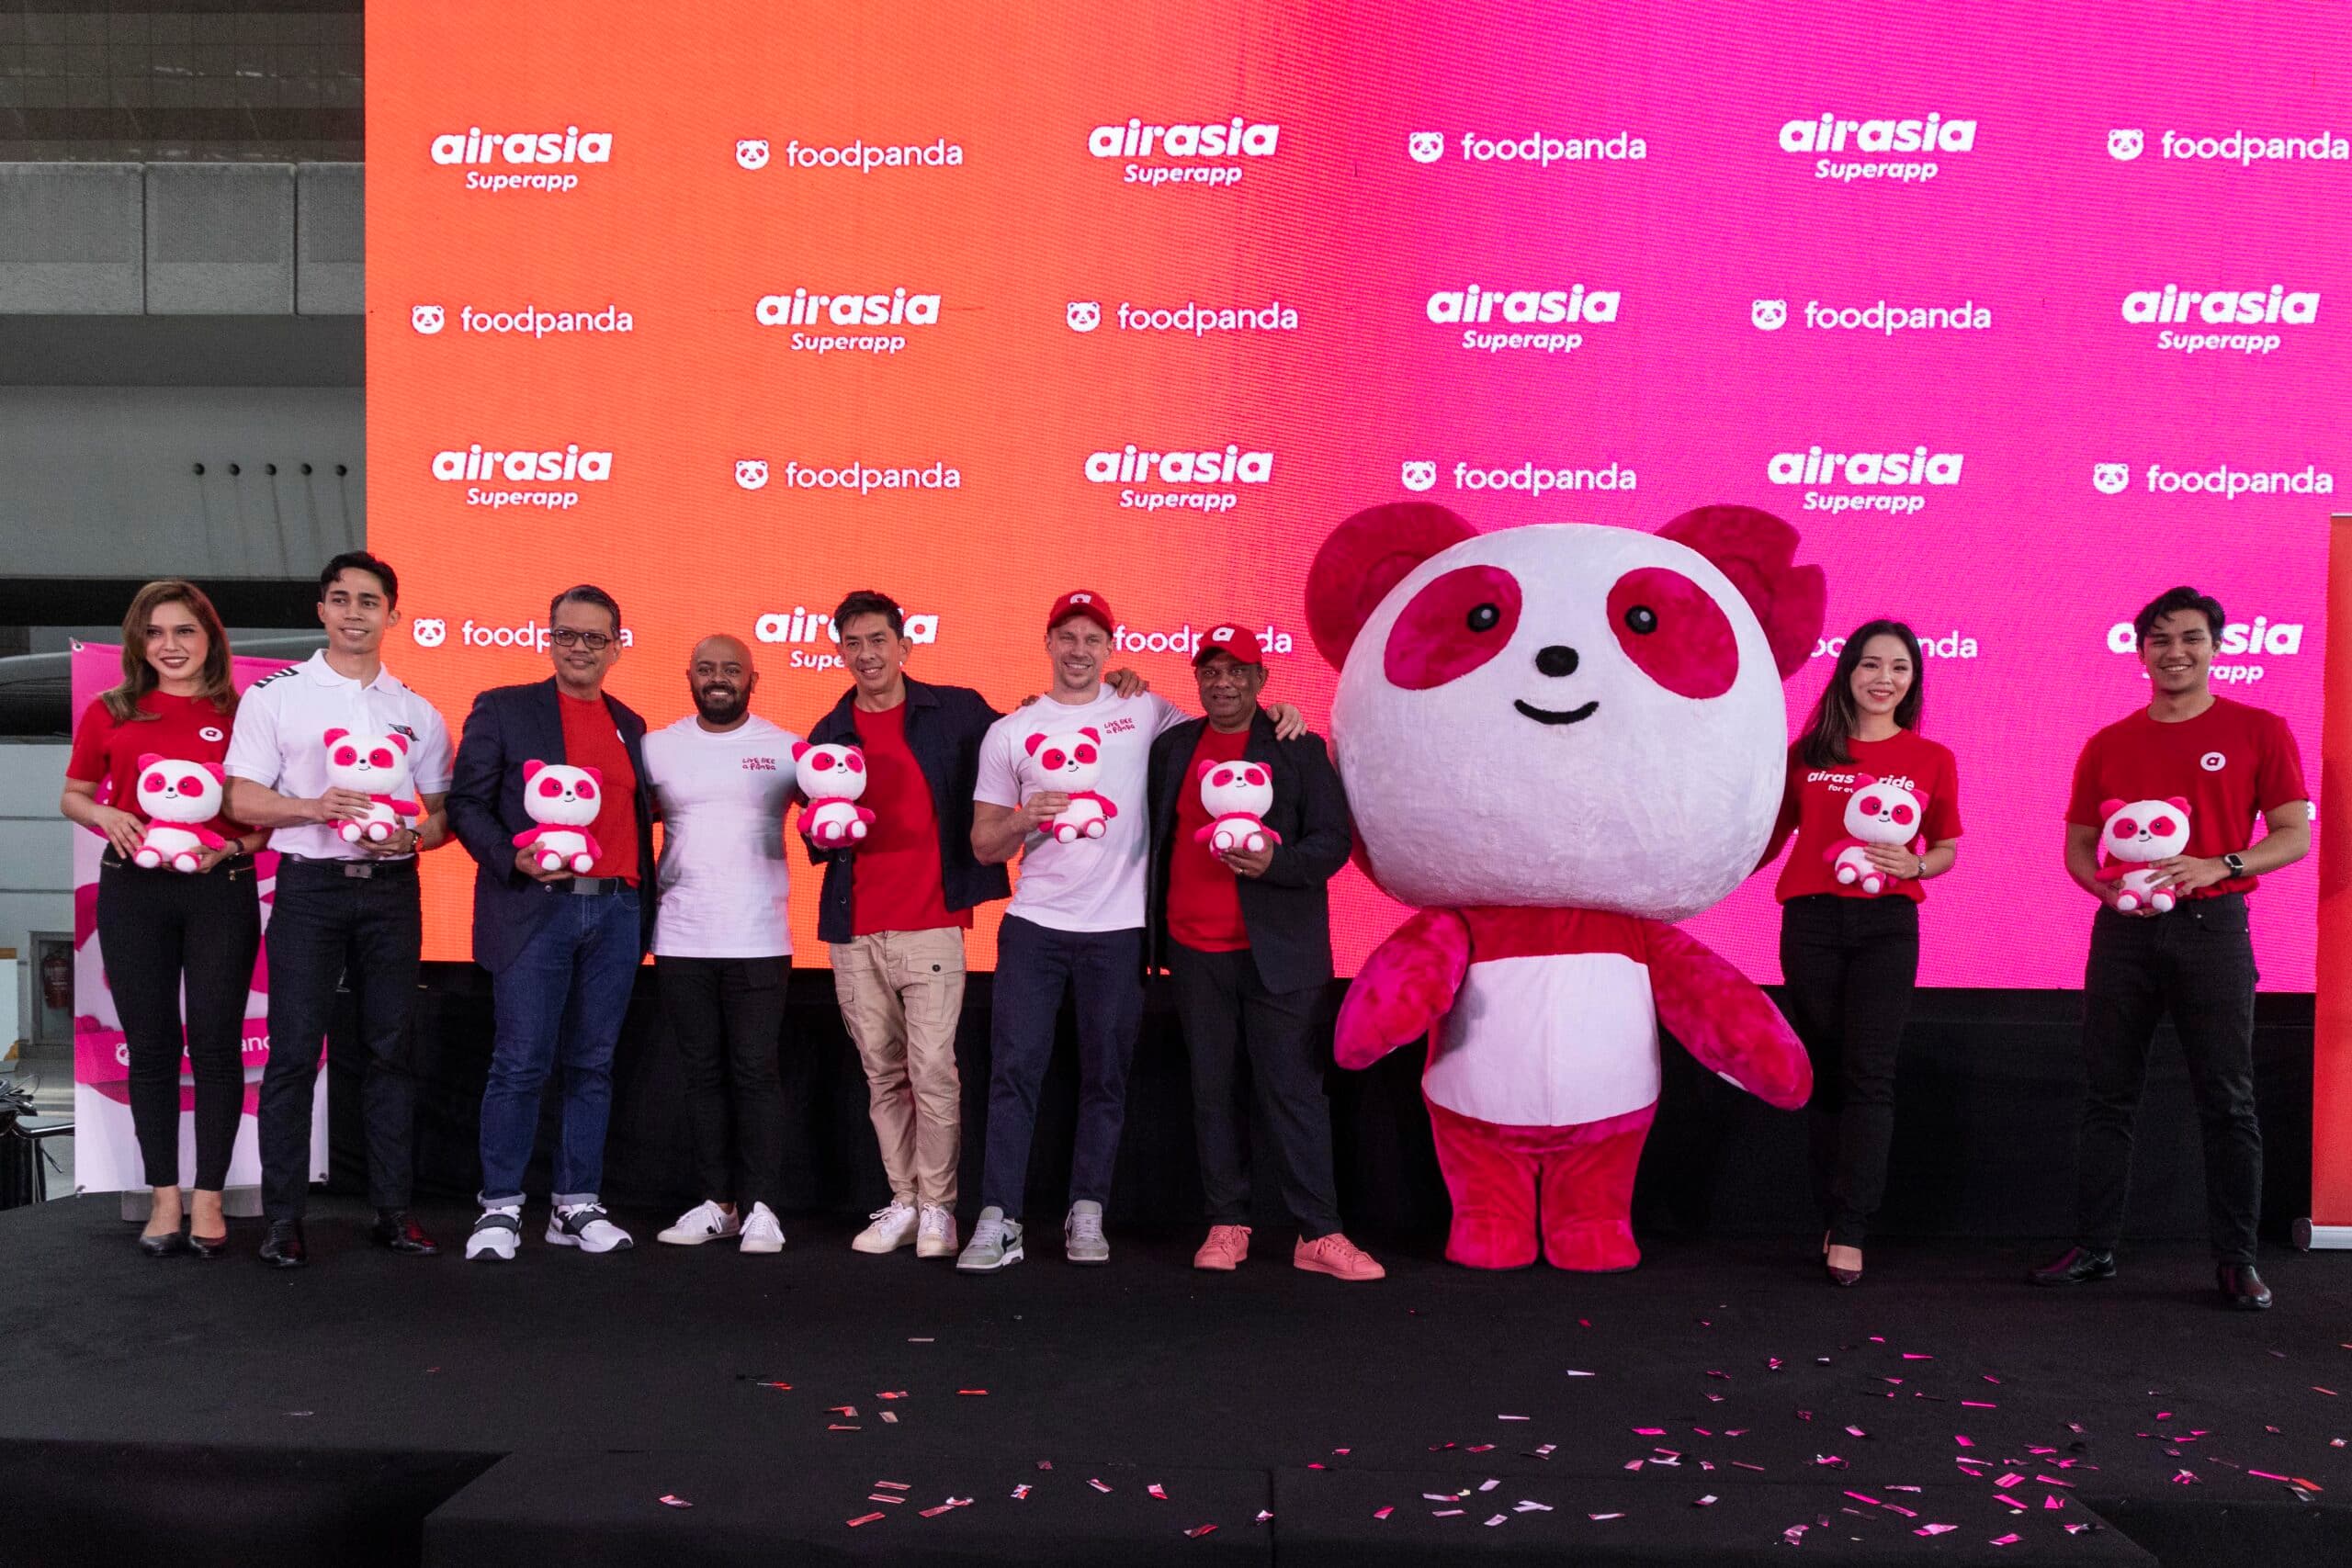 “Red meets pink” – airasia Superapp & foodpanda join forces for a groundbreaking partnership